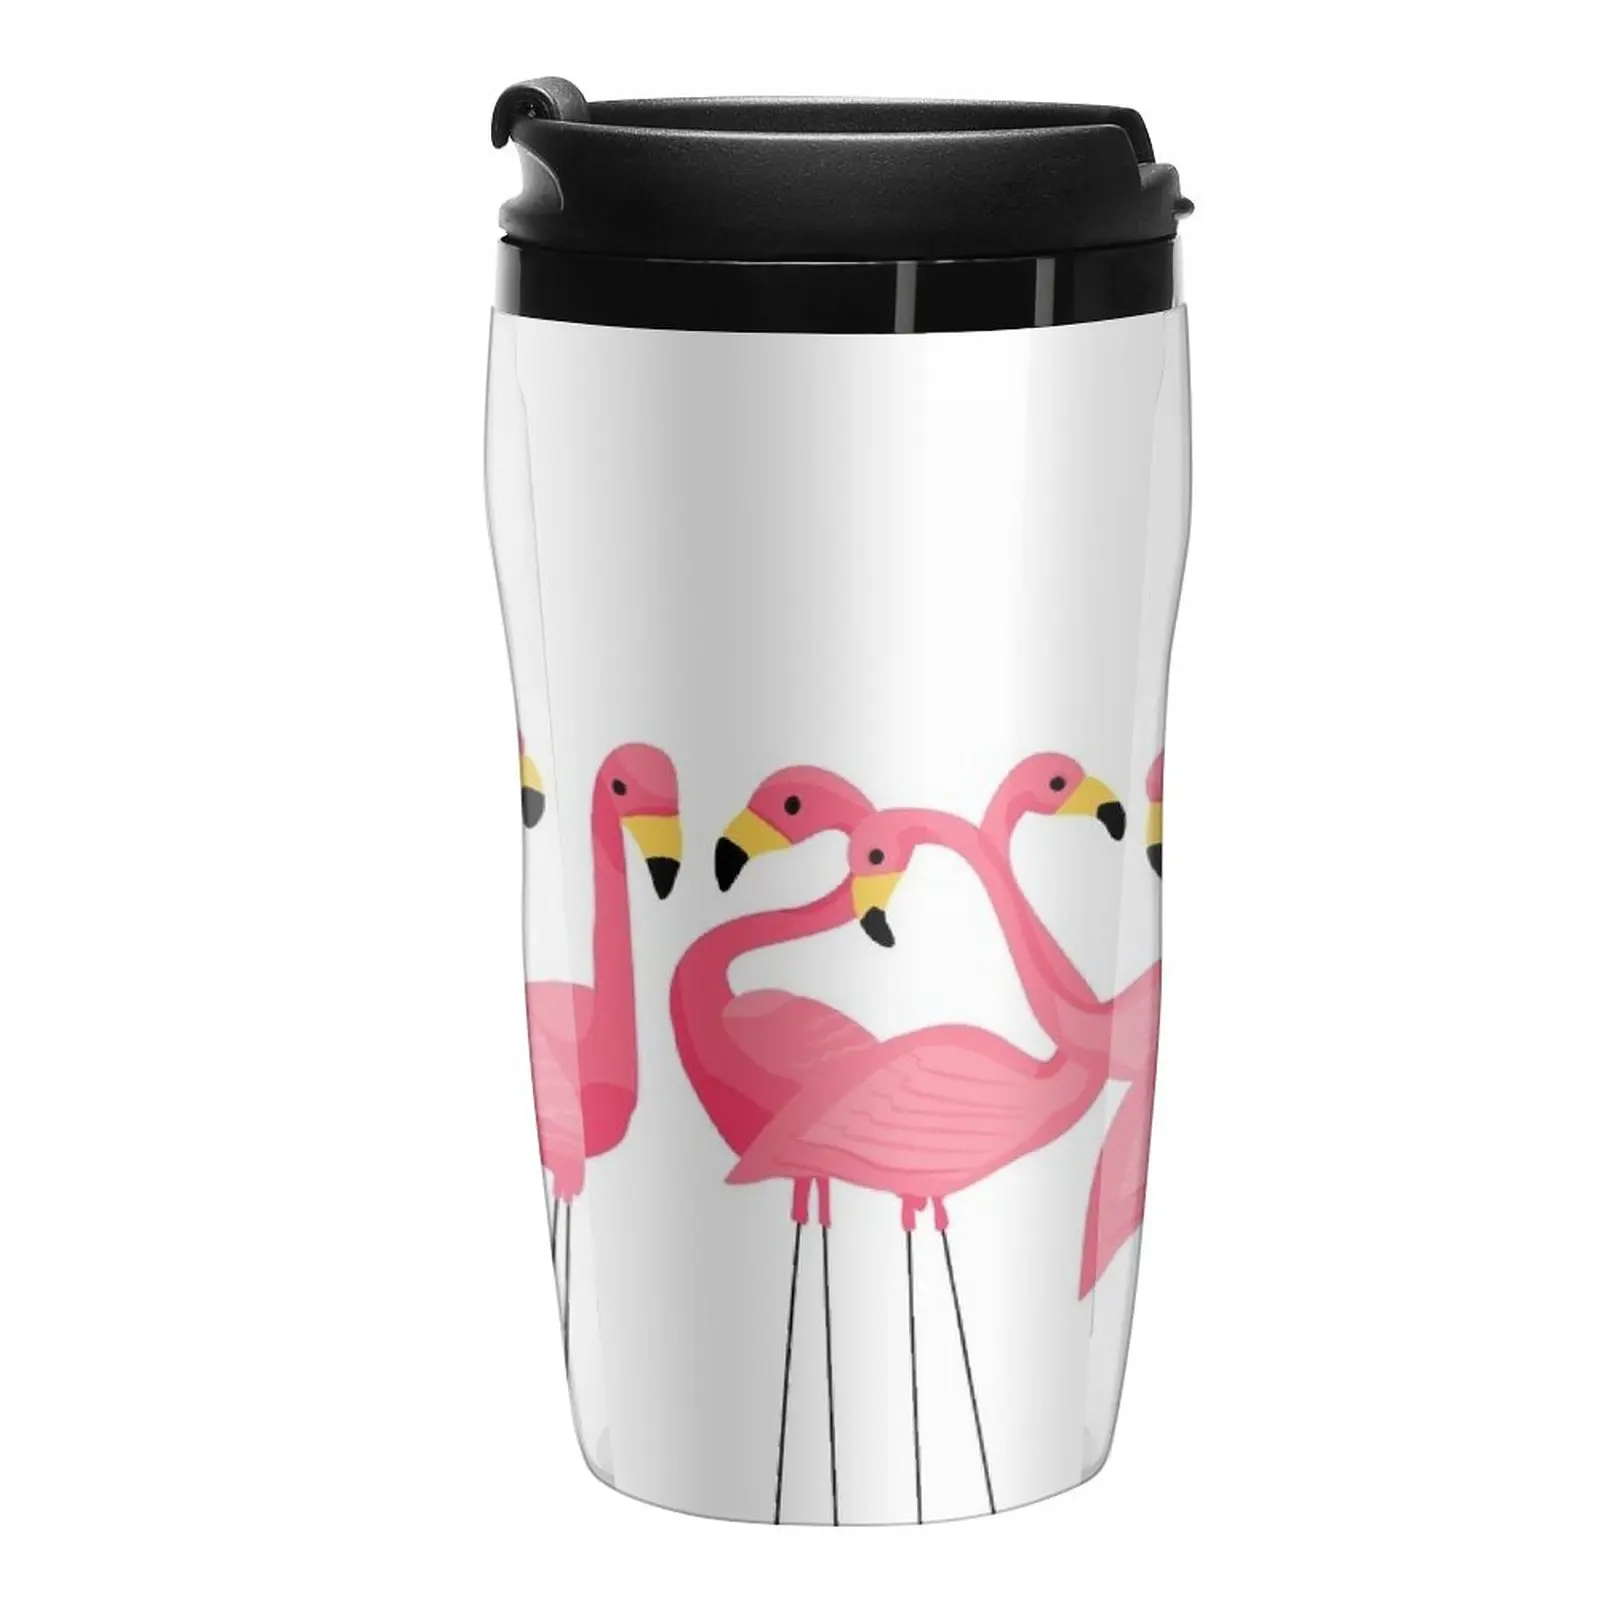 

New Pink Flamingos Illustration Travel Coffee Mug Espresso Coffee Cups Cup Coffe Teaware Cafes Coffee Glass Cup